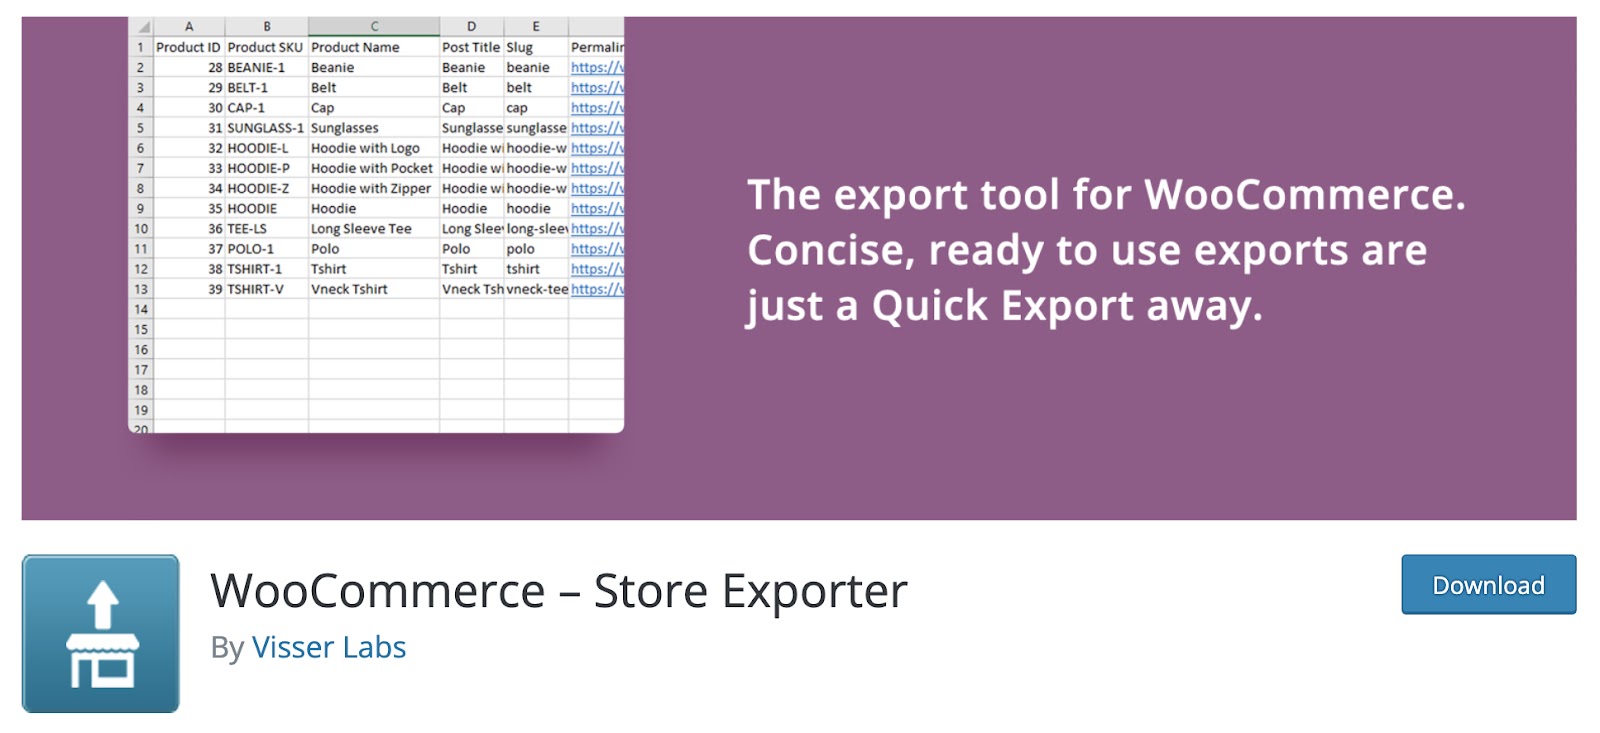 WooCommerce Product Export CSV - Store Exporter